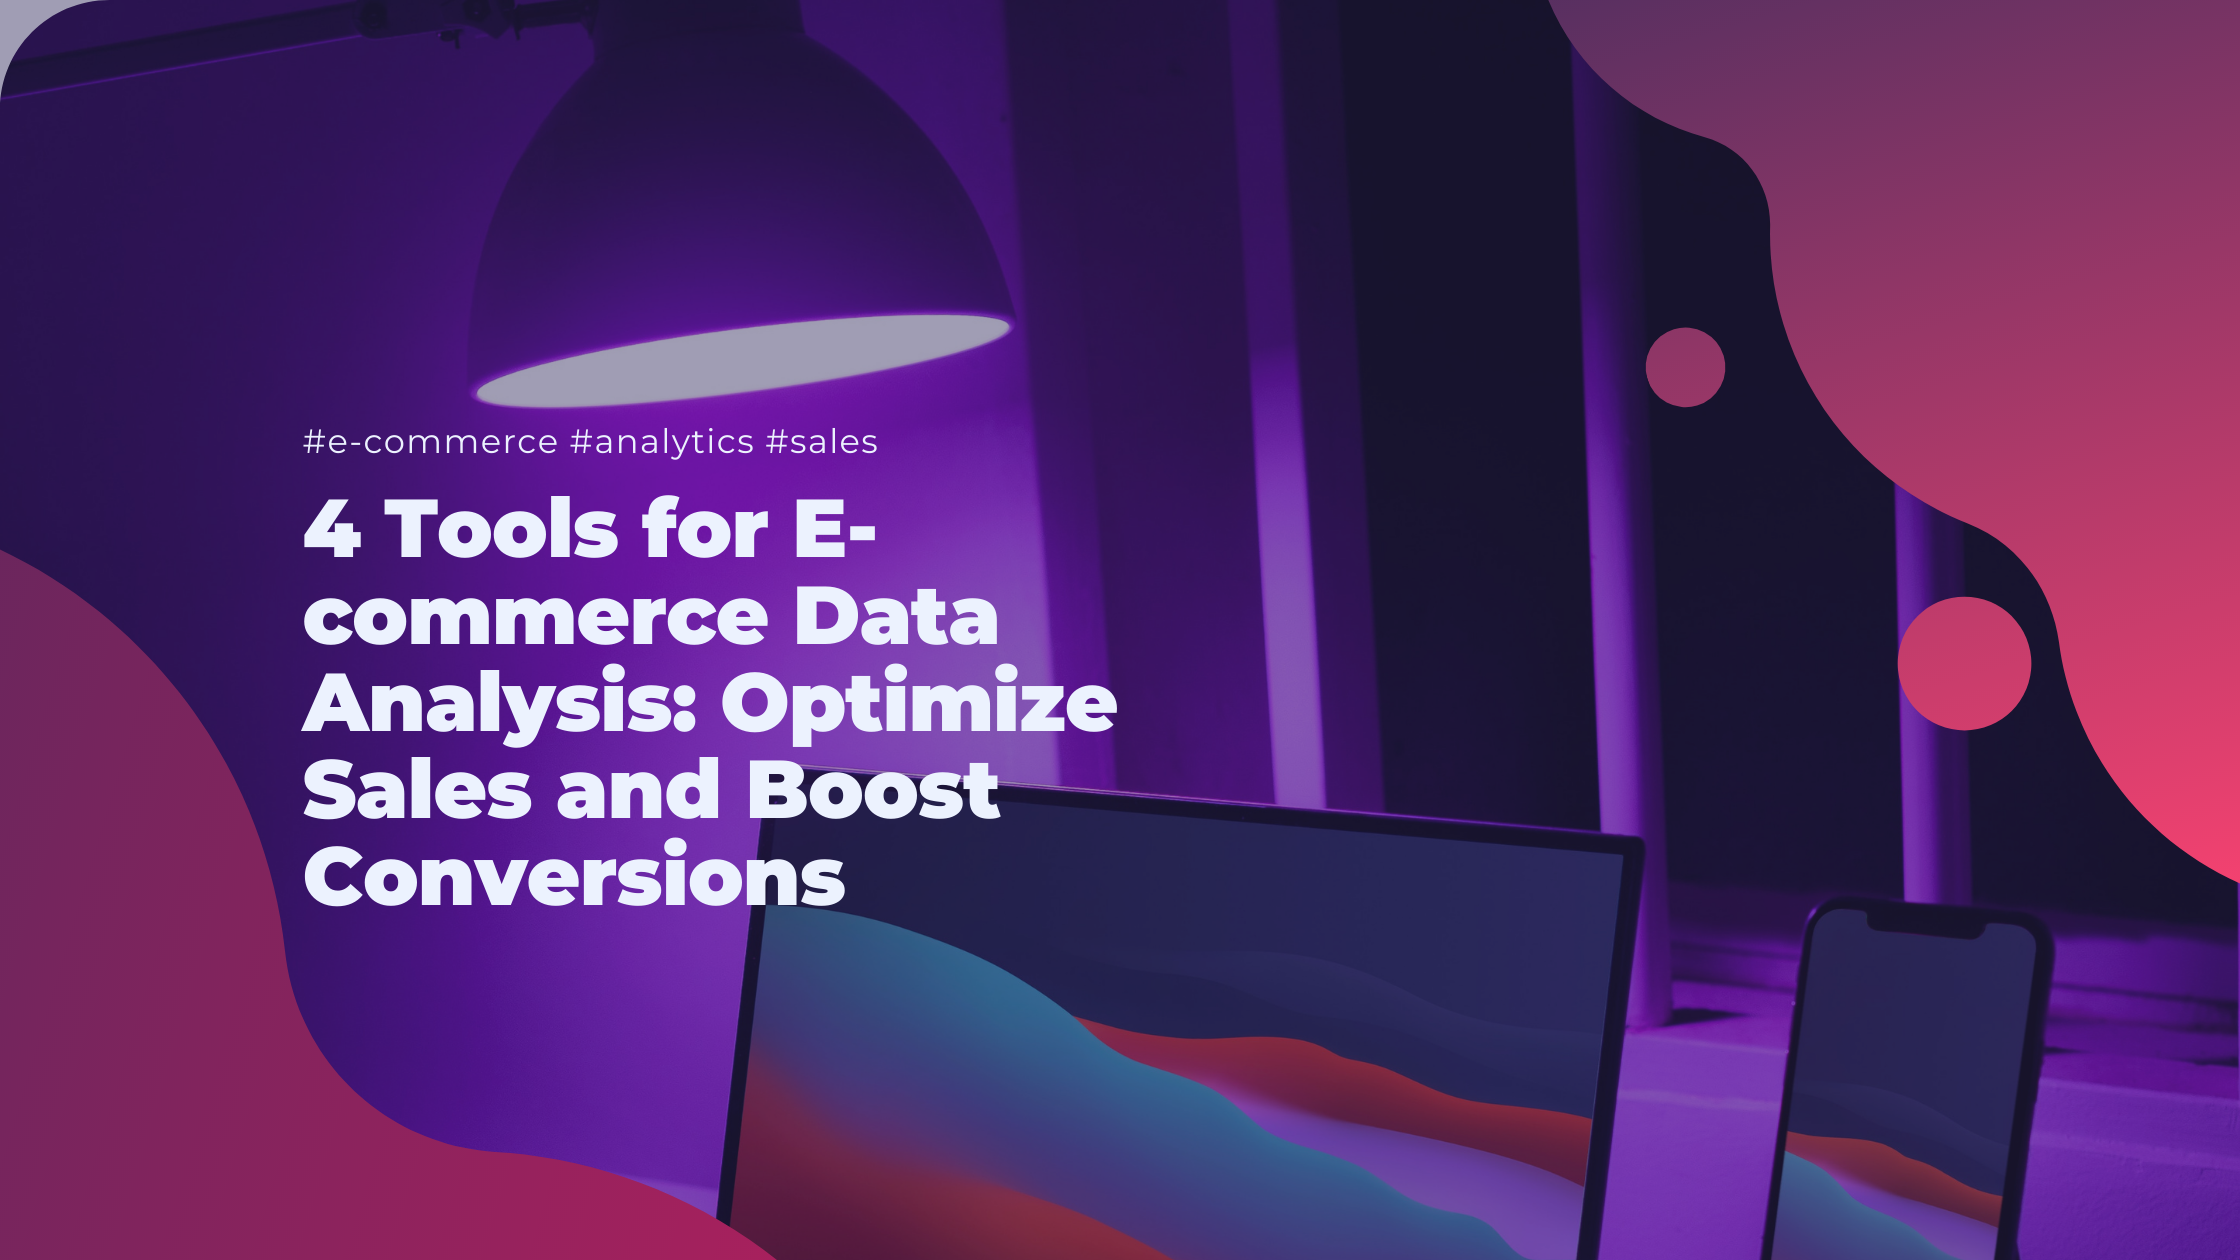 4 Tools for E-commerce Data Analysis: Optimize Sales and Boost Conversions